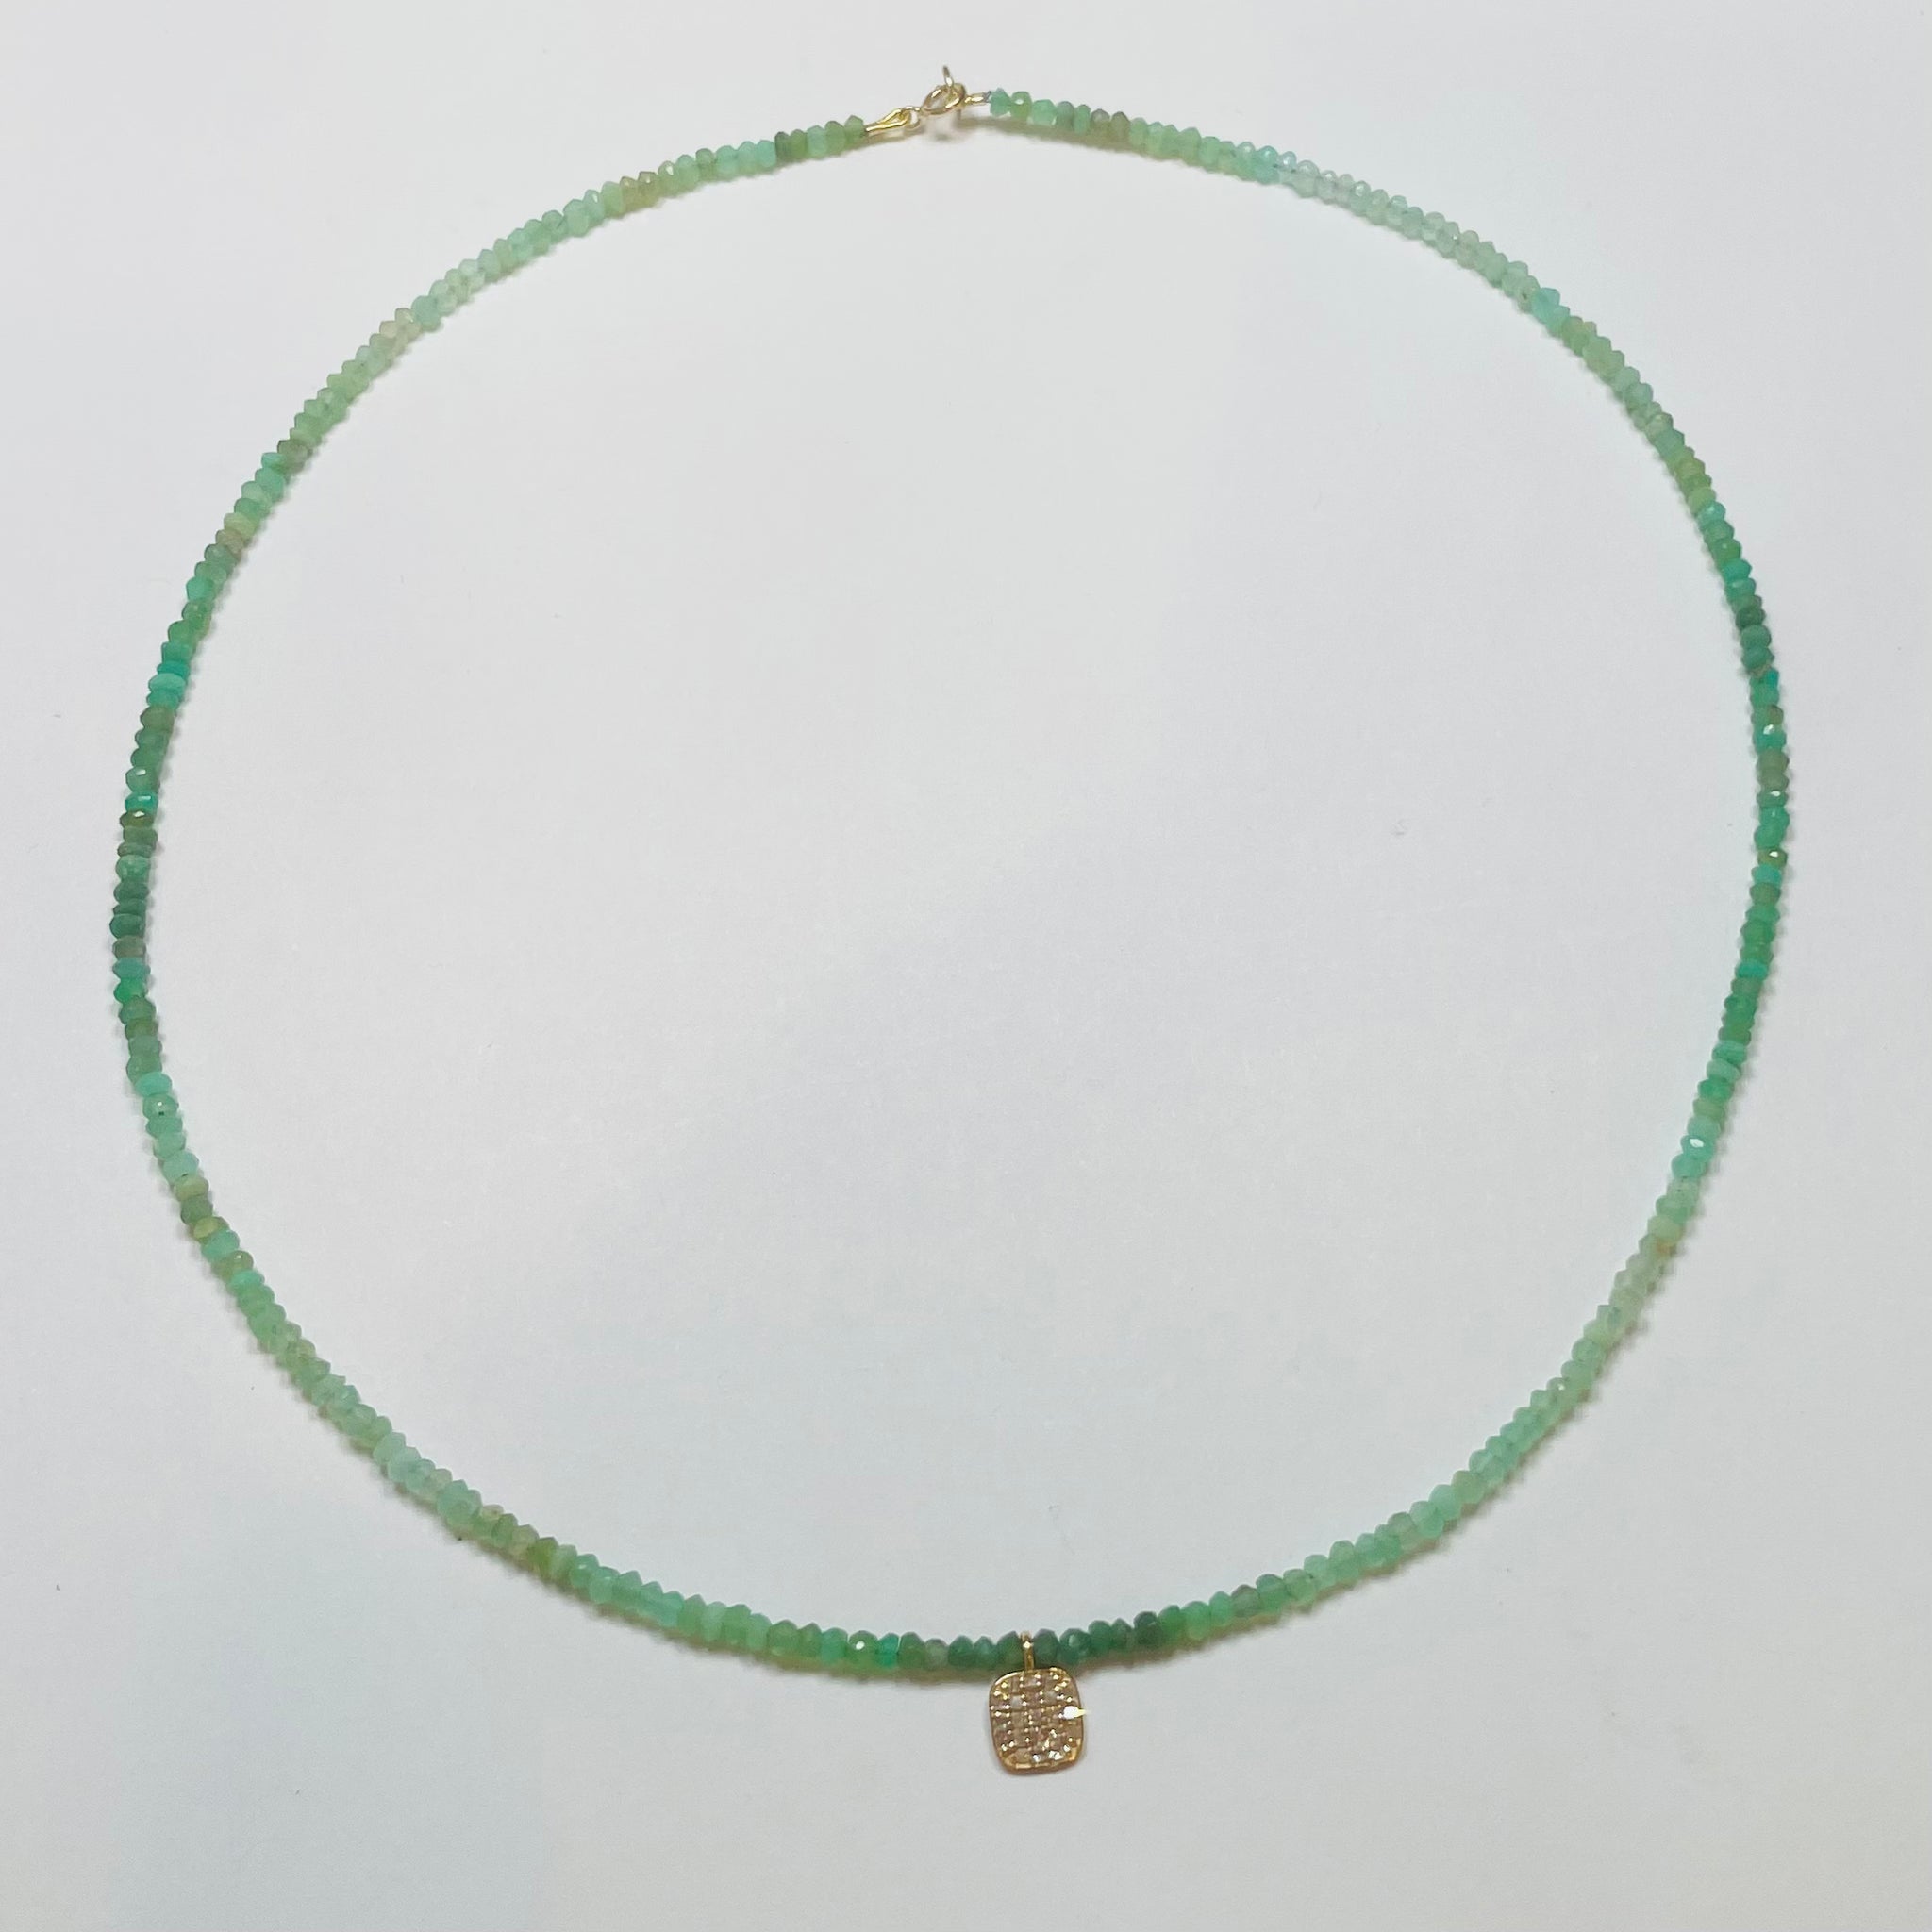 delicate chrysoprase necklace with square charm